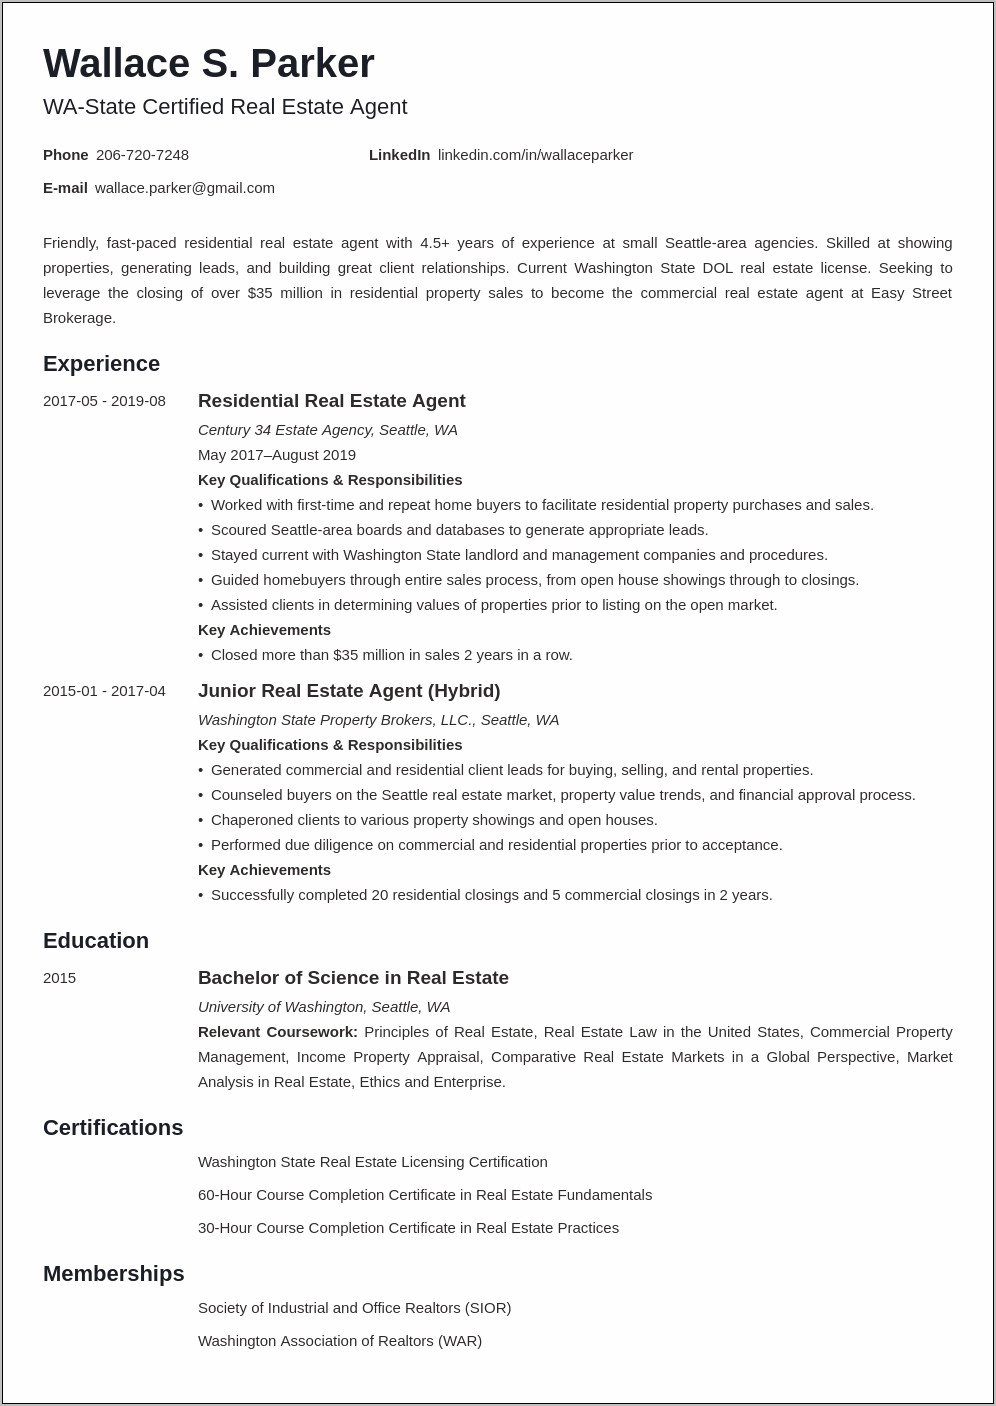 Add Real Estate Agent To A Resumes Experience